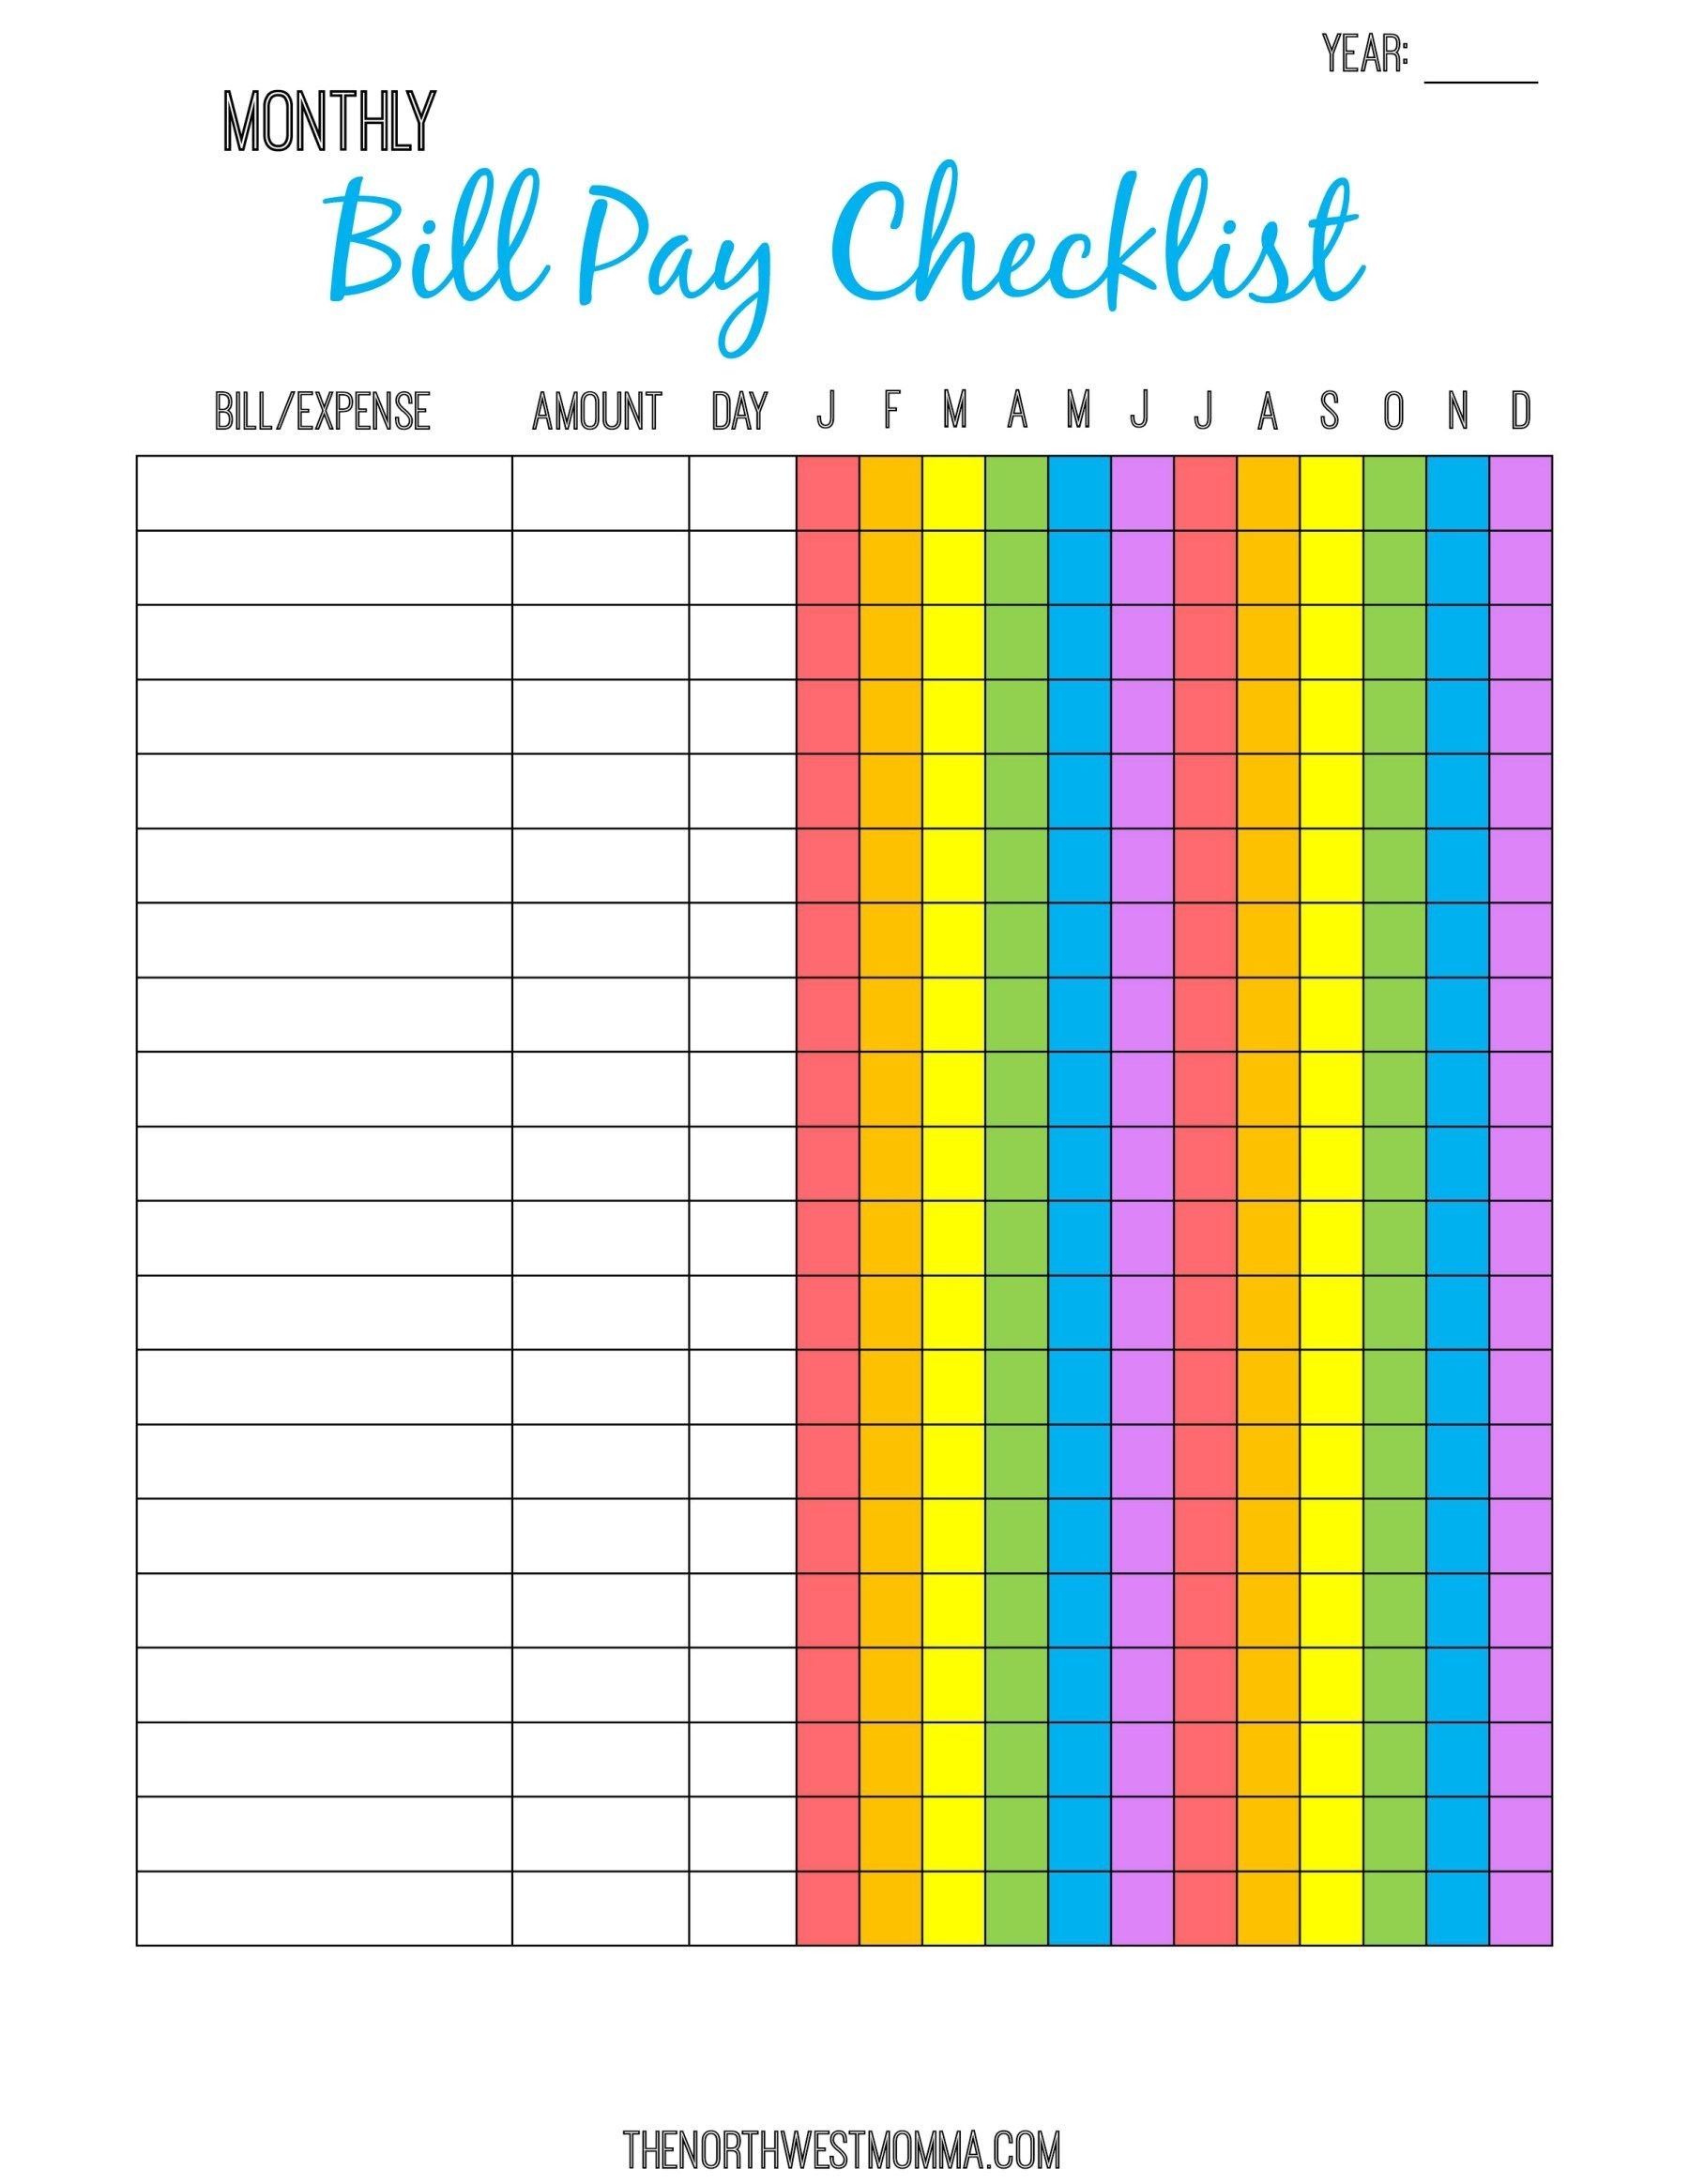 Contact Support | Bill Pay Checklist, Paying Bills, Bills  Free Printable Monthly Bill Pay